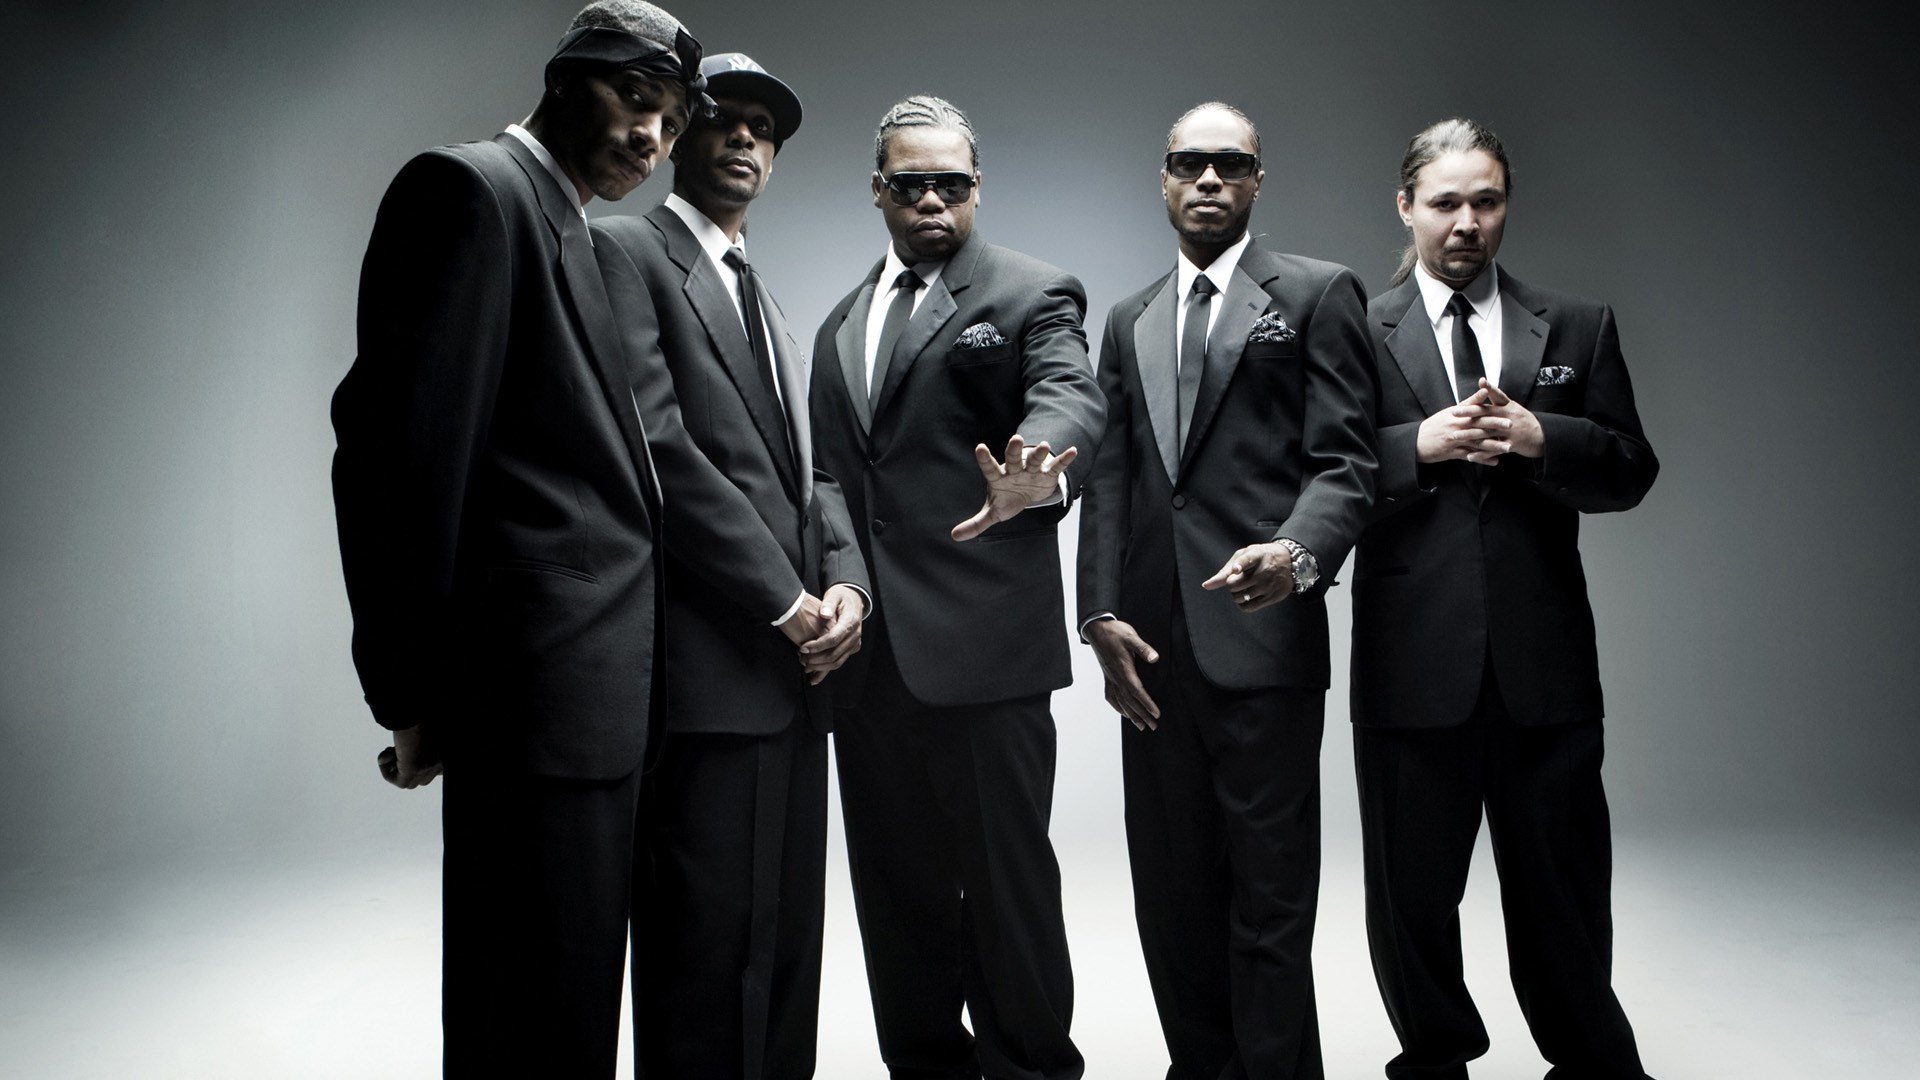 bone thugs n harmony wallpaper,suit,photography,white collar worker,event,formal wear